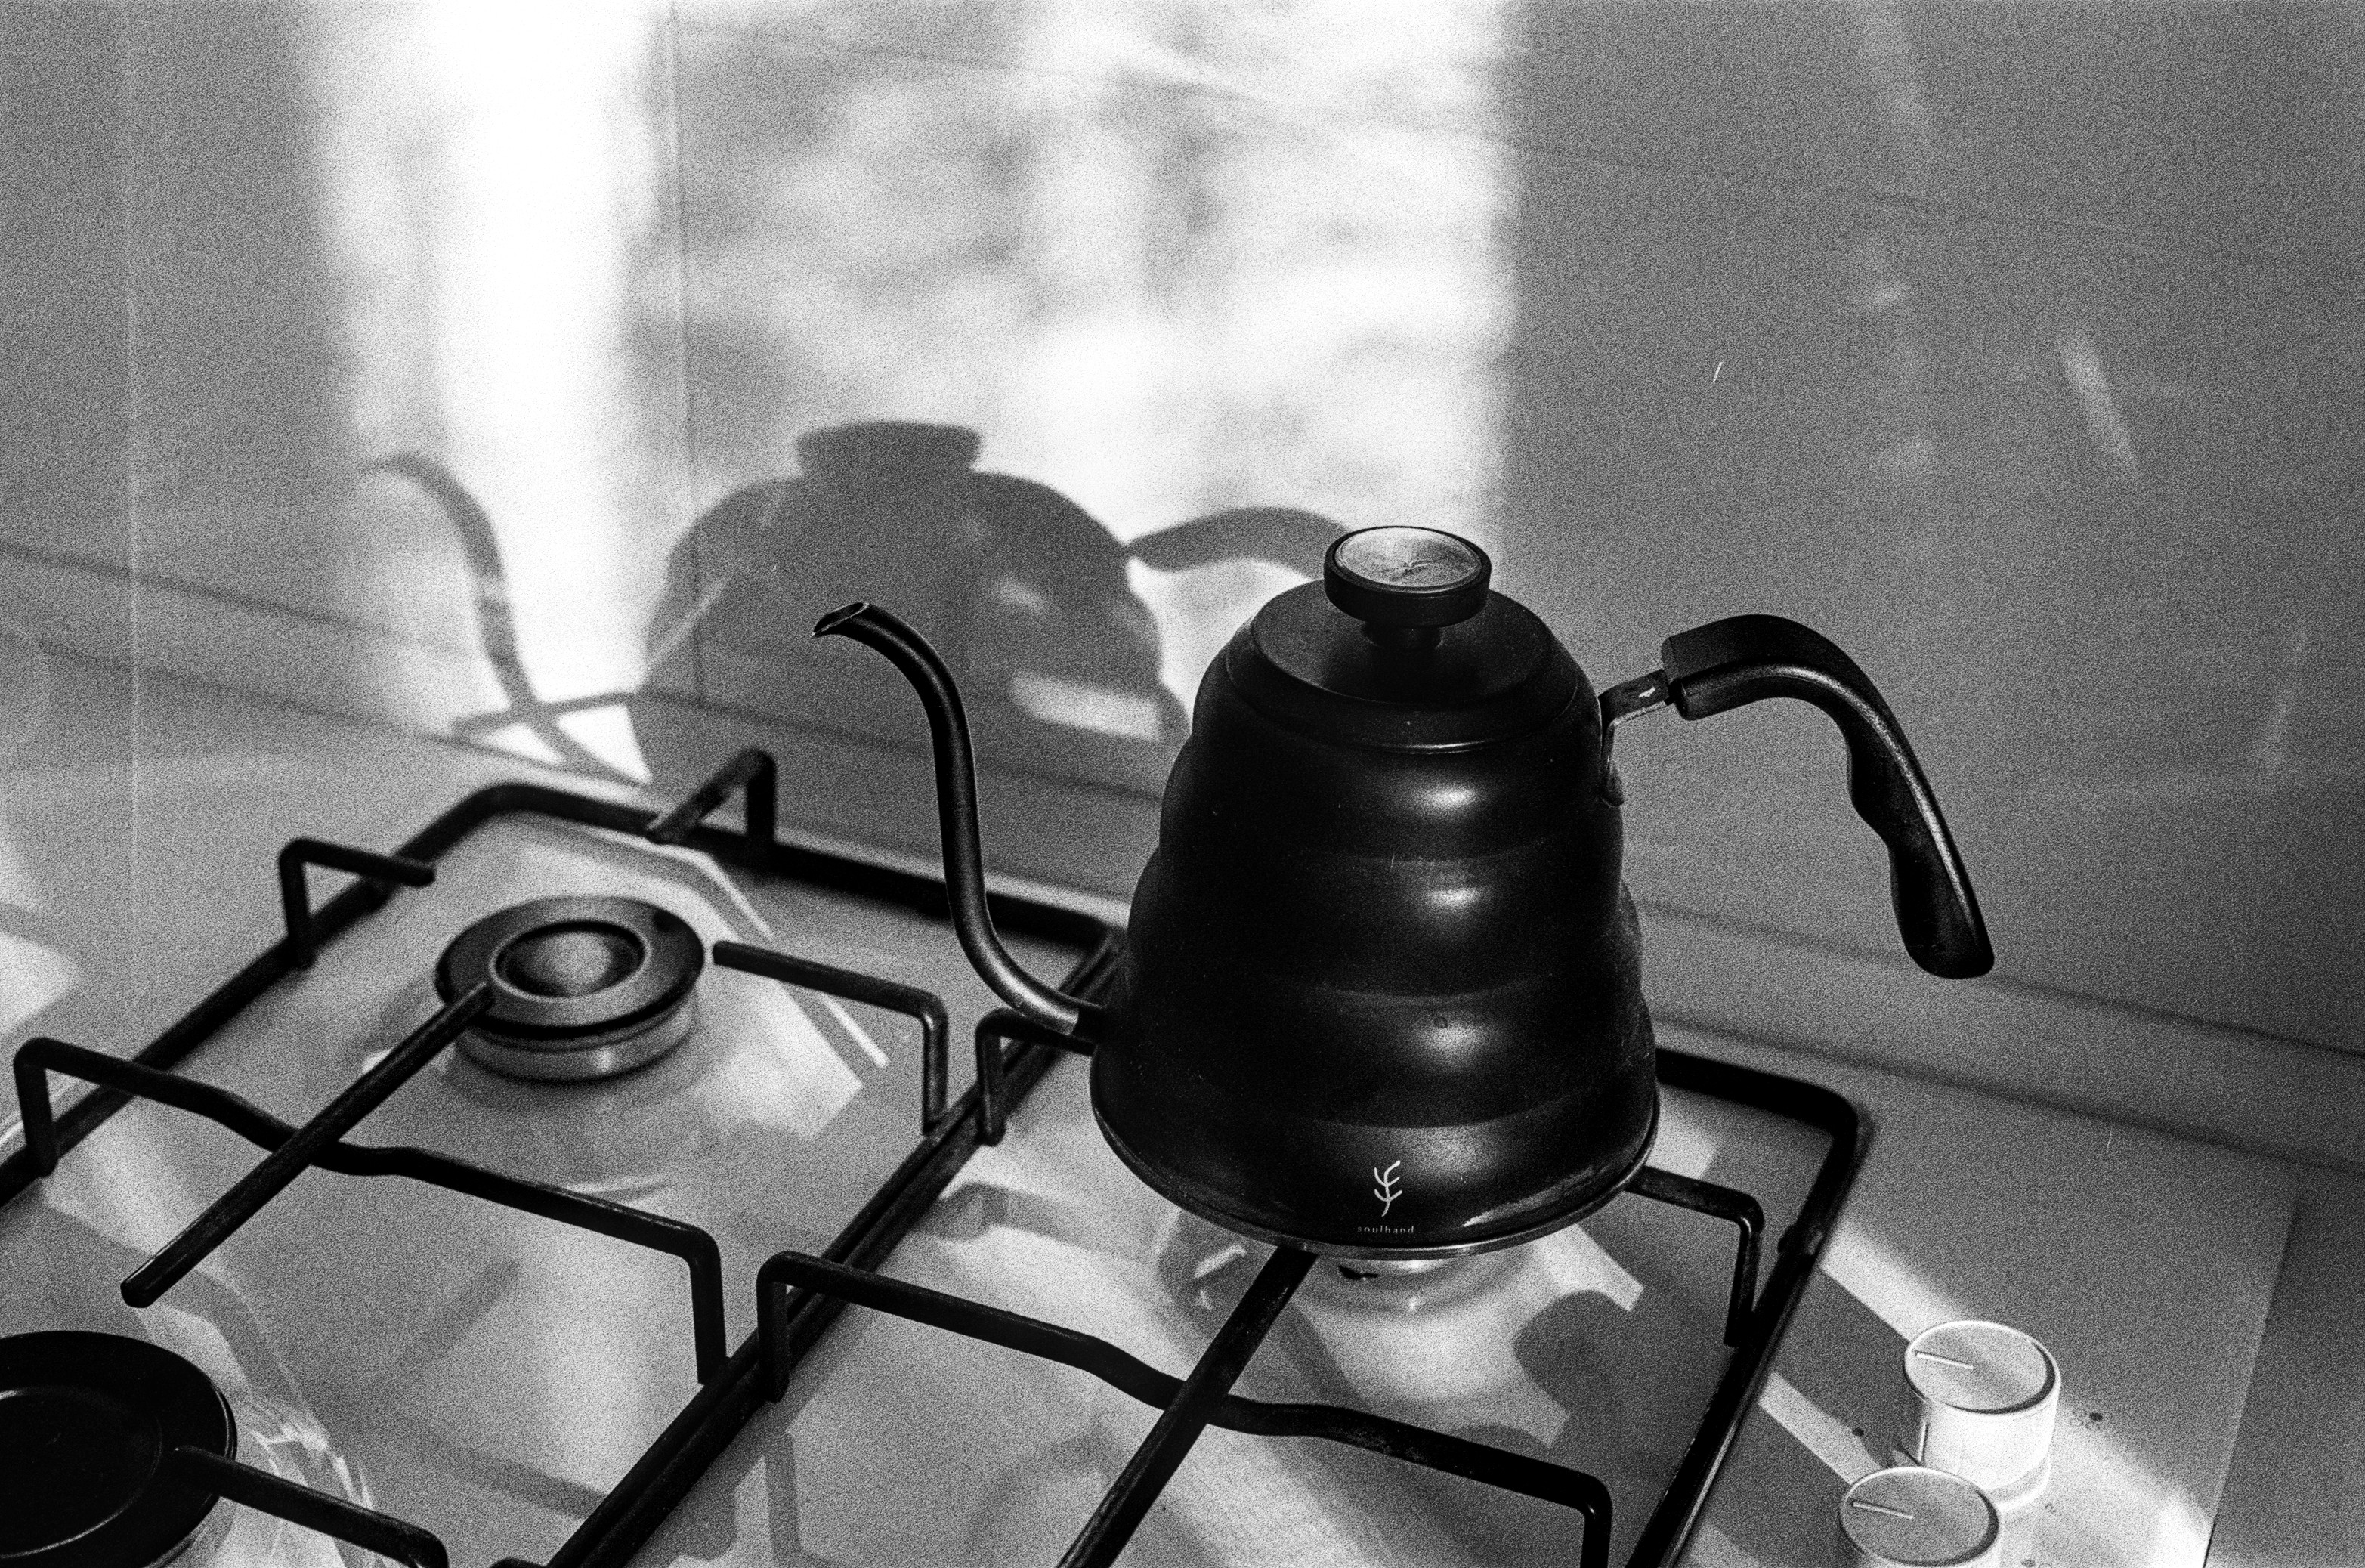 The image shows a black stovetop kettle. The kettle is made of metal and has a black finish. The kettle has a cone shape that tapers upward. Long, narrow spout in the shape of a goose's neck.
The kettle is lit by the sun and casts a shadow on the wall